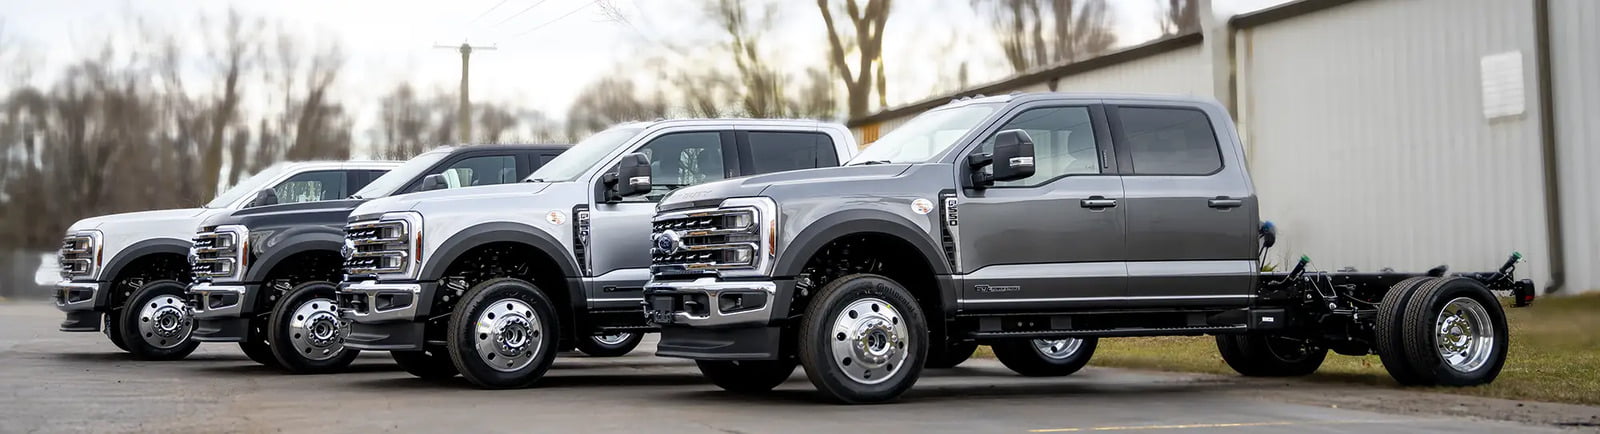 Ford F-550 Chassis Cab inventory, ready for custom aluminum bed upgrade by Luxe Trucks.